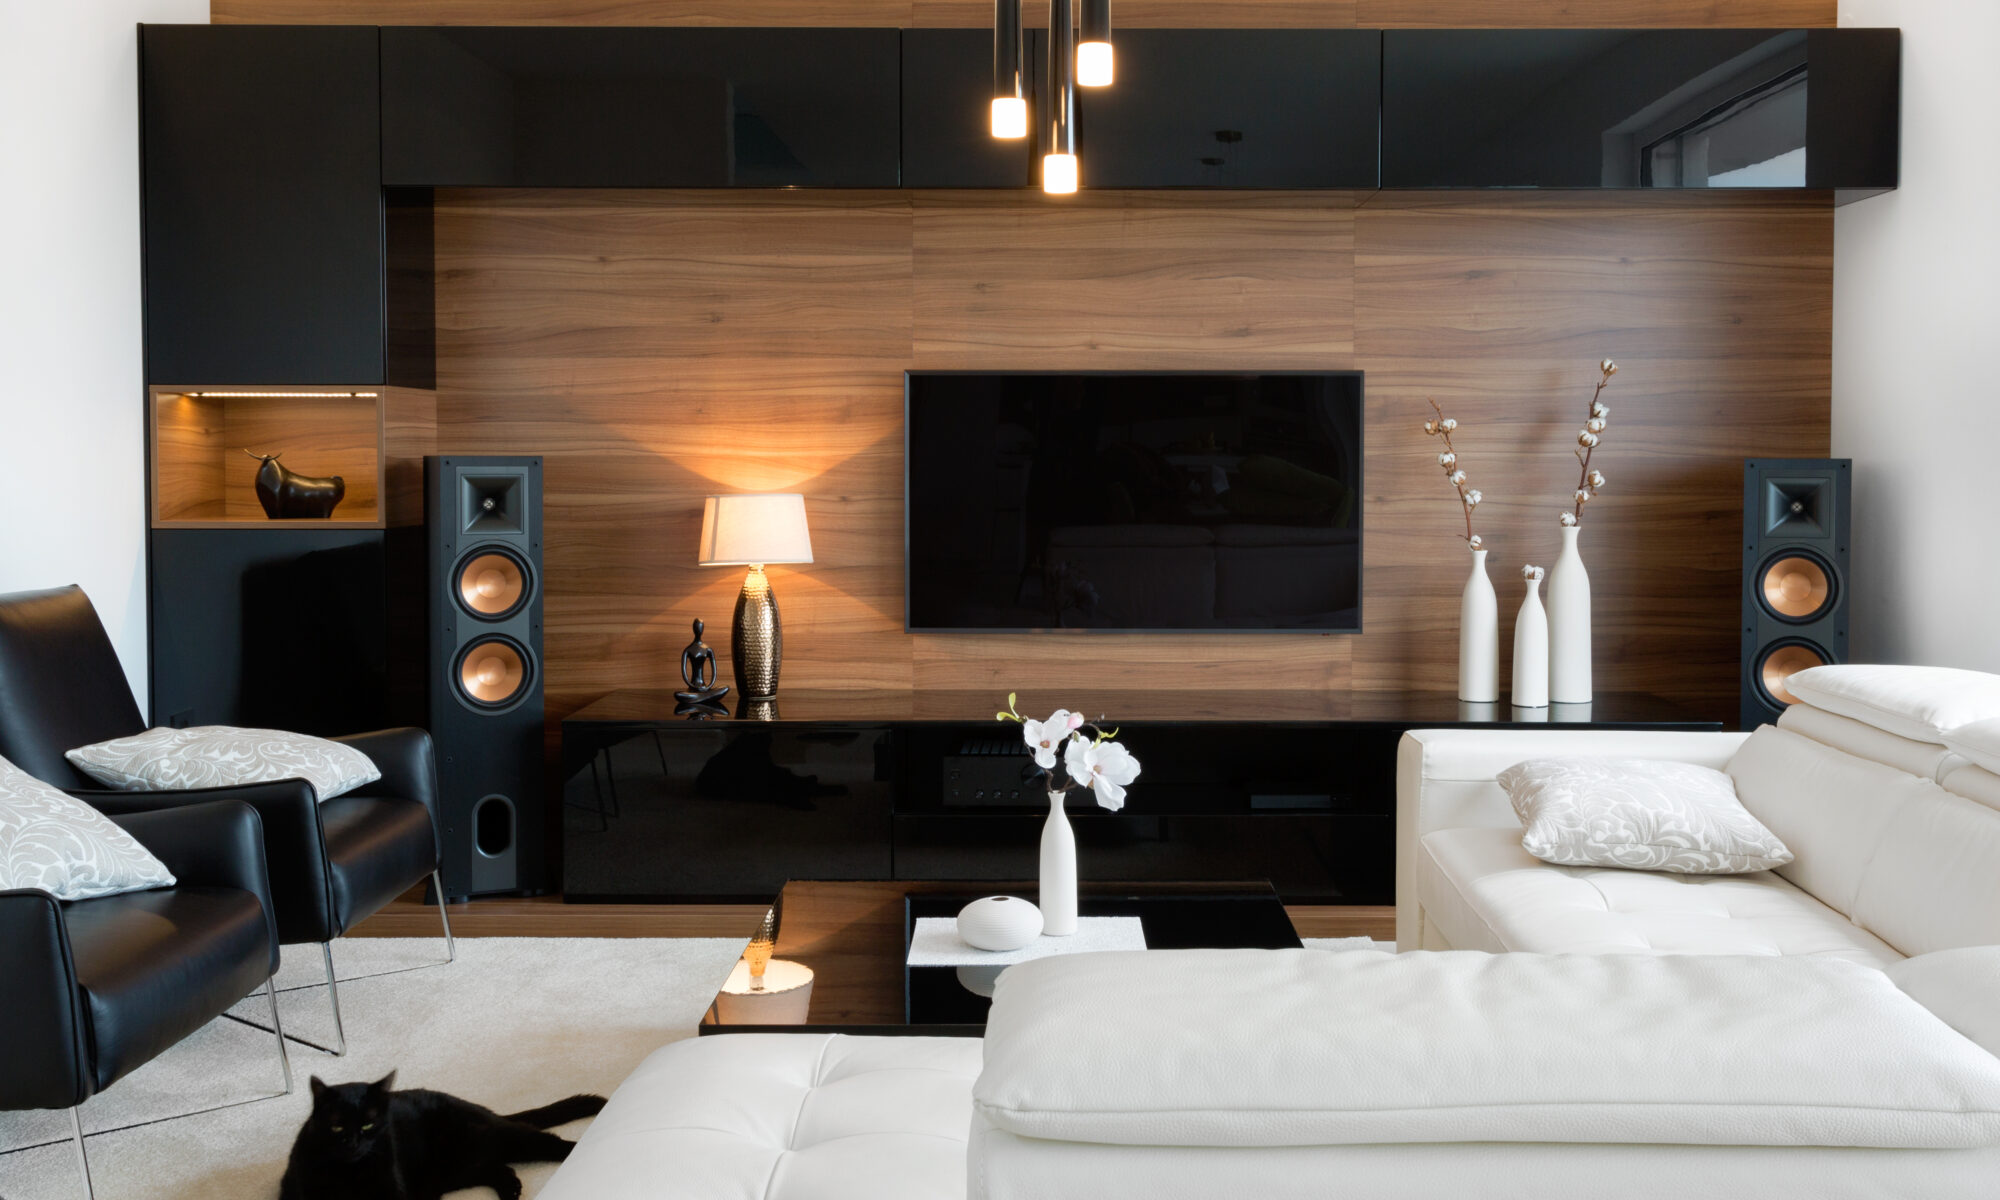 How to position surround sound speakers